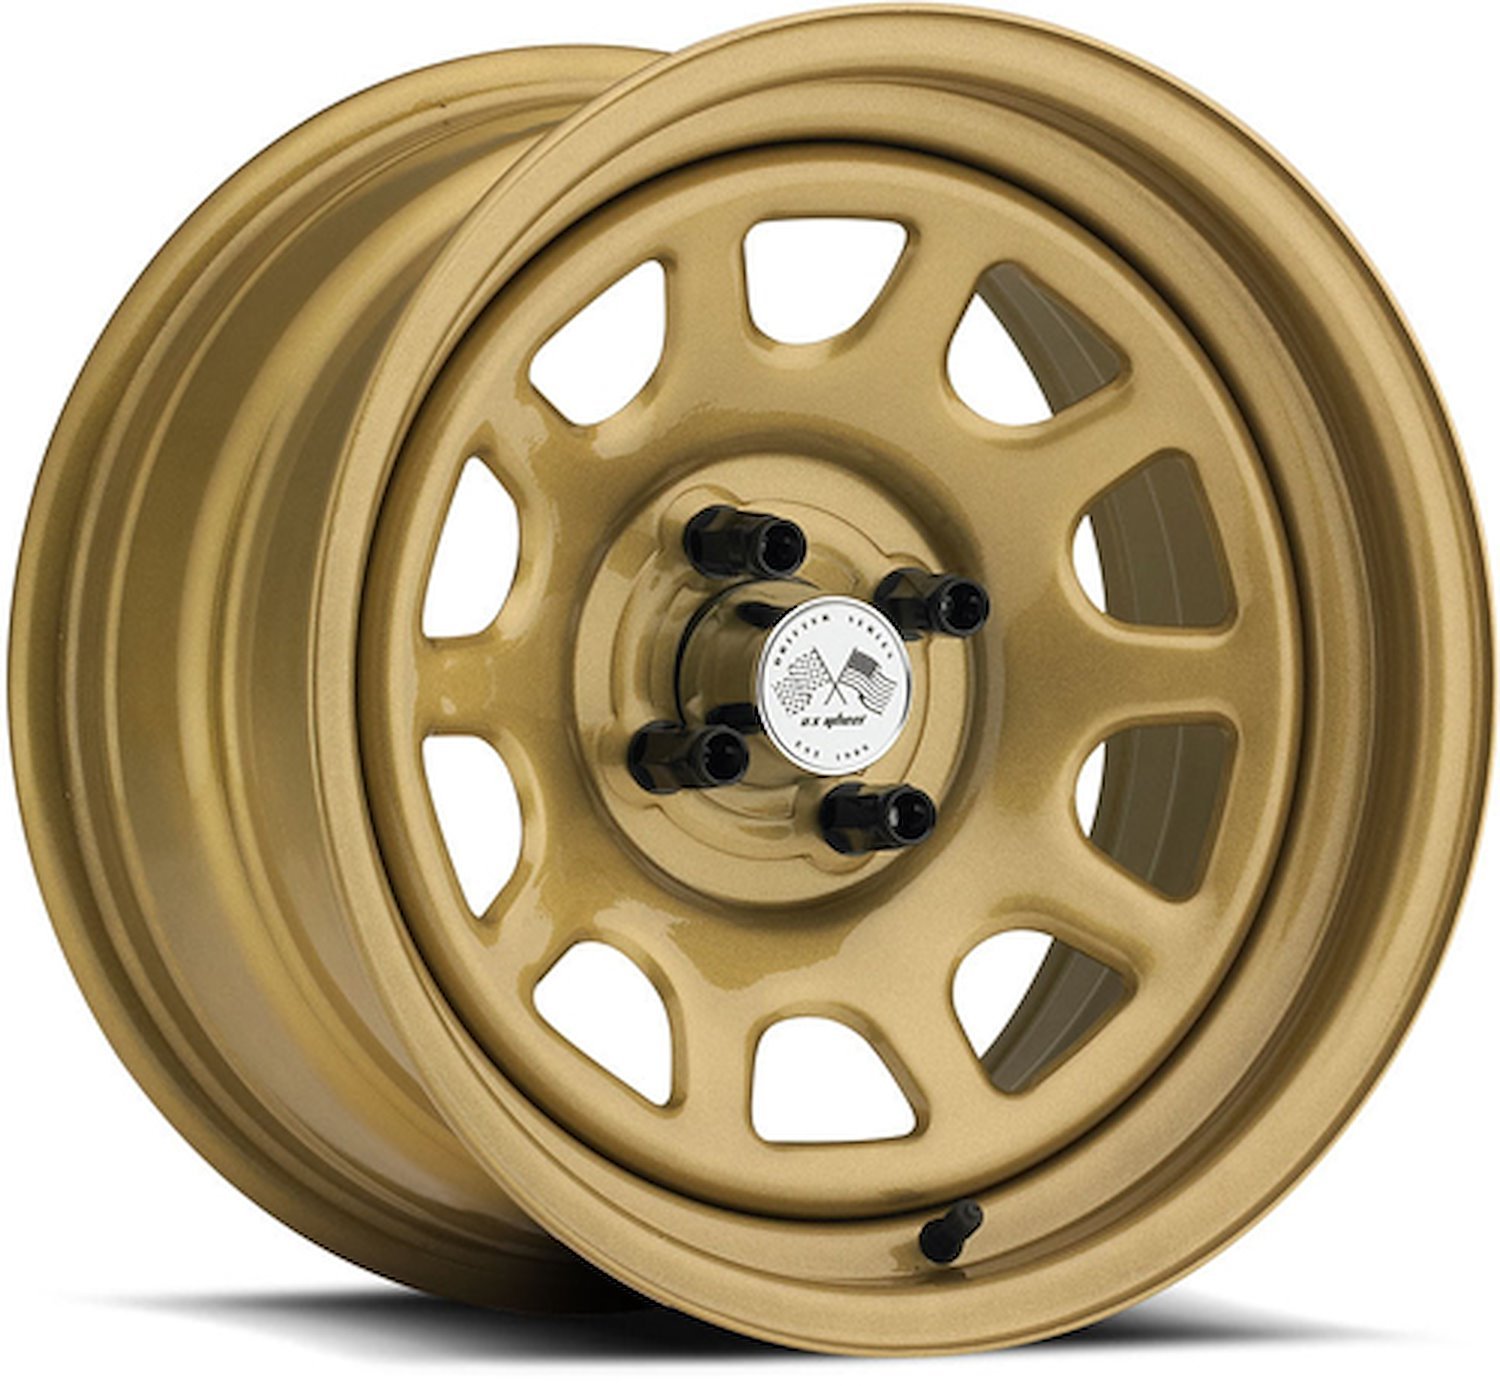 PAINTED DAYTONA FWD DRIFTER GOLD 16 x 10 4 x 45 Bolt Circle 5 12 Back Spacing 0 offset 266 Center Bore 1400 lbs Load Rating